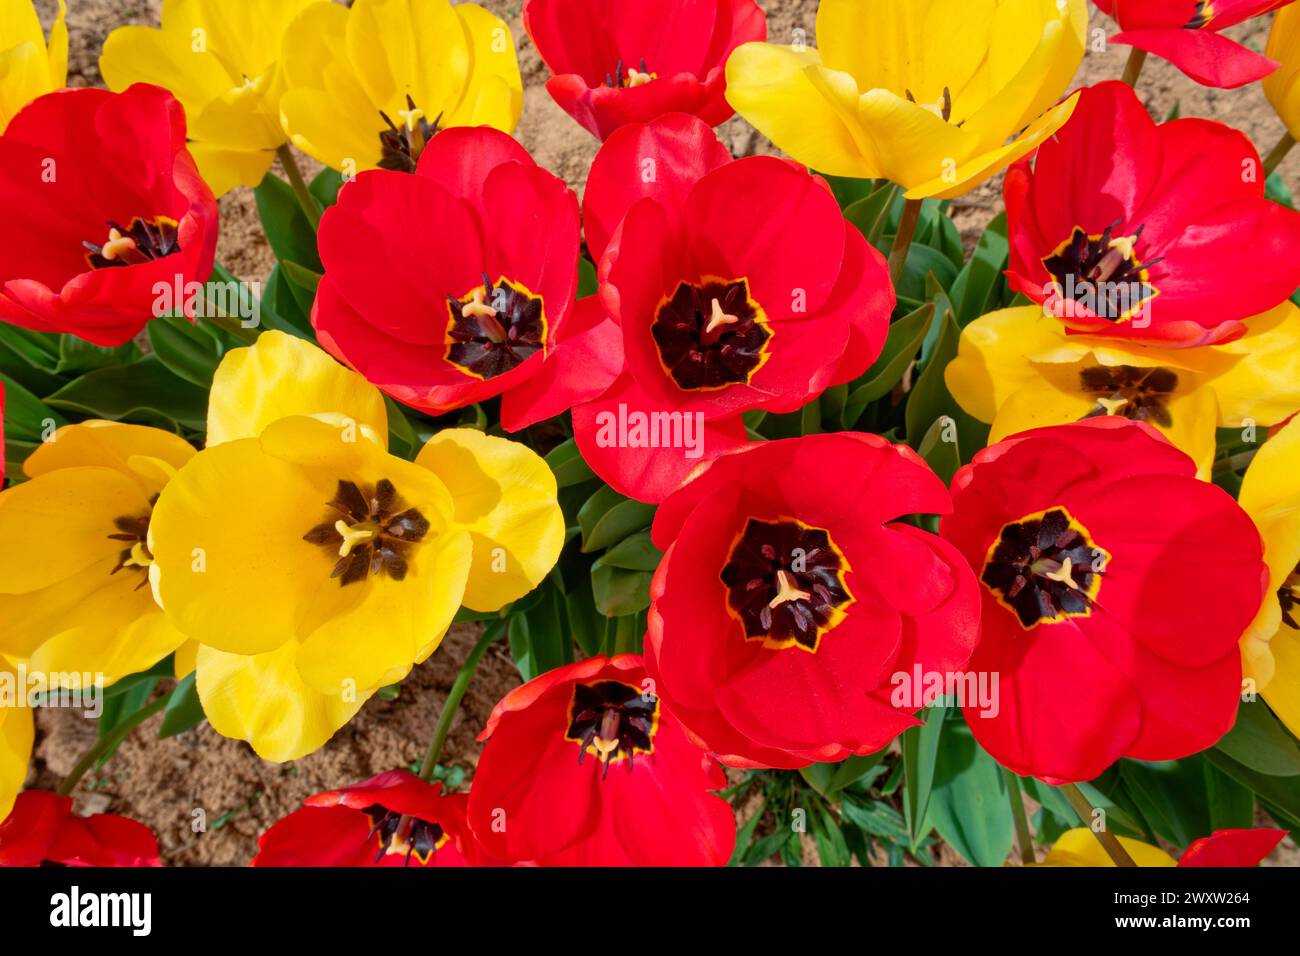 Looking down into opened red and yellow tulip flowers with foliage on the bottom growing from the ground closeup view for backgrounds wallpaper and ba Stock Photo